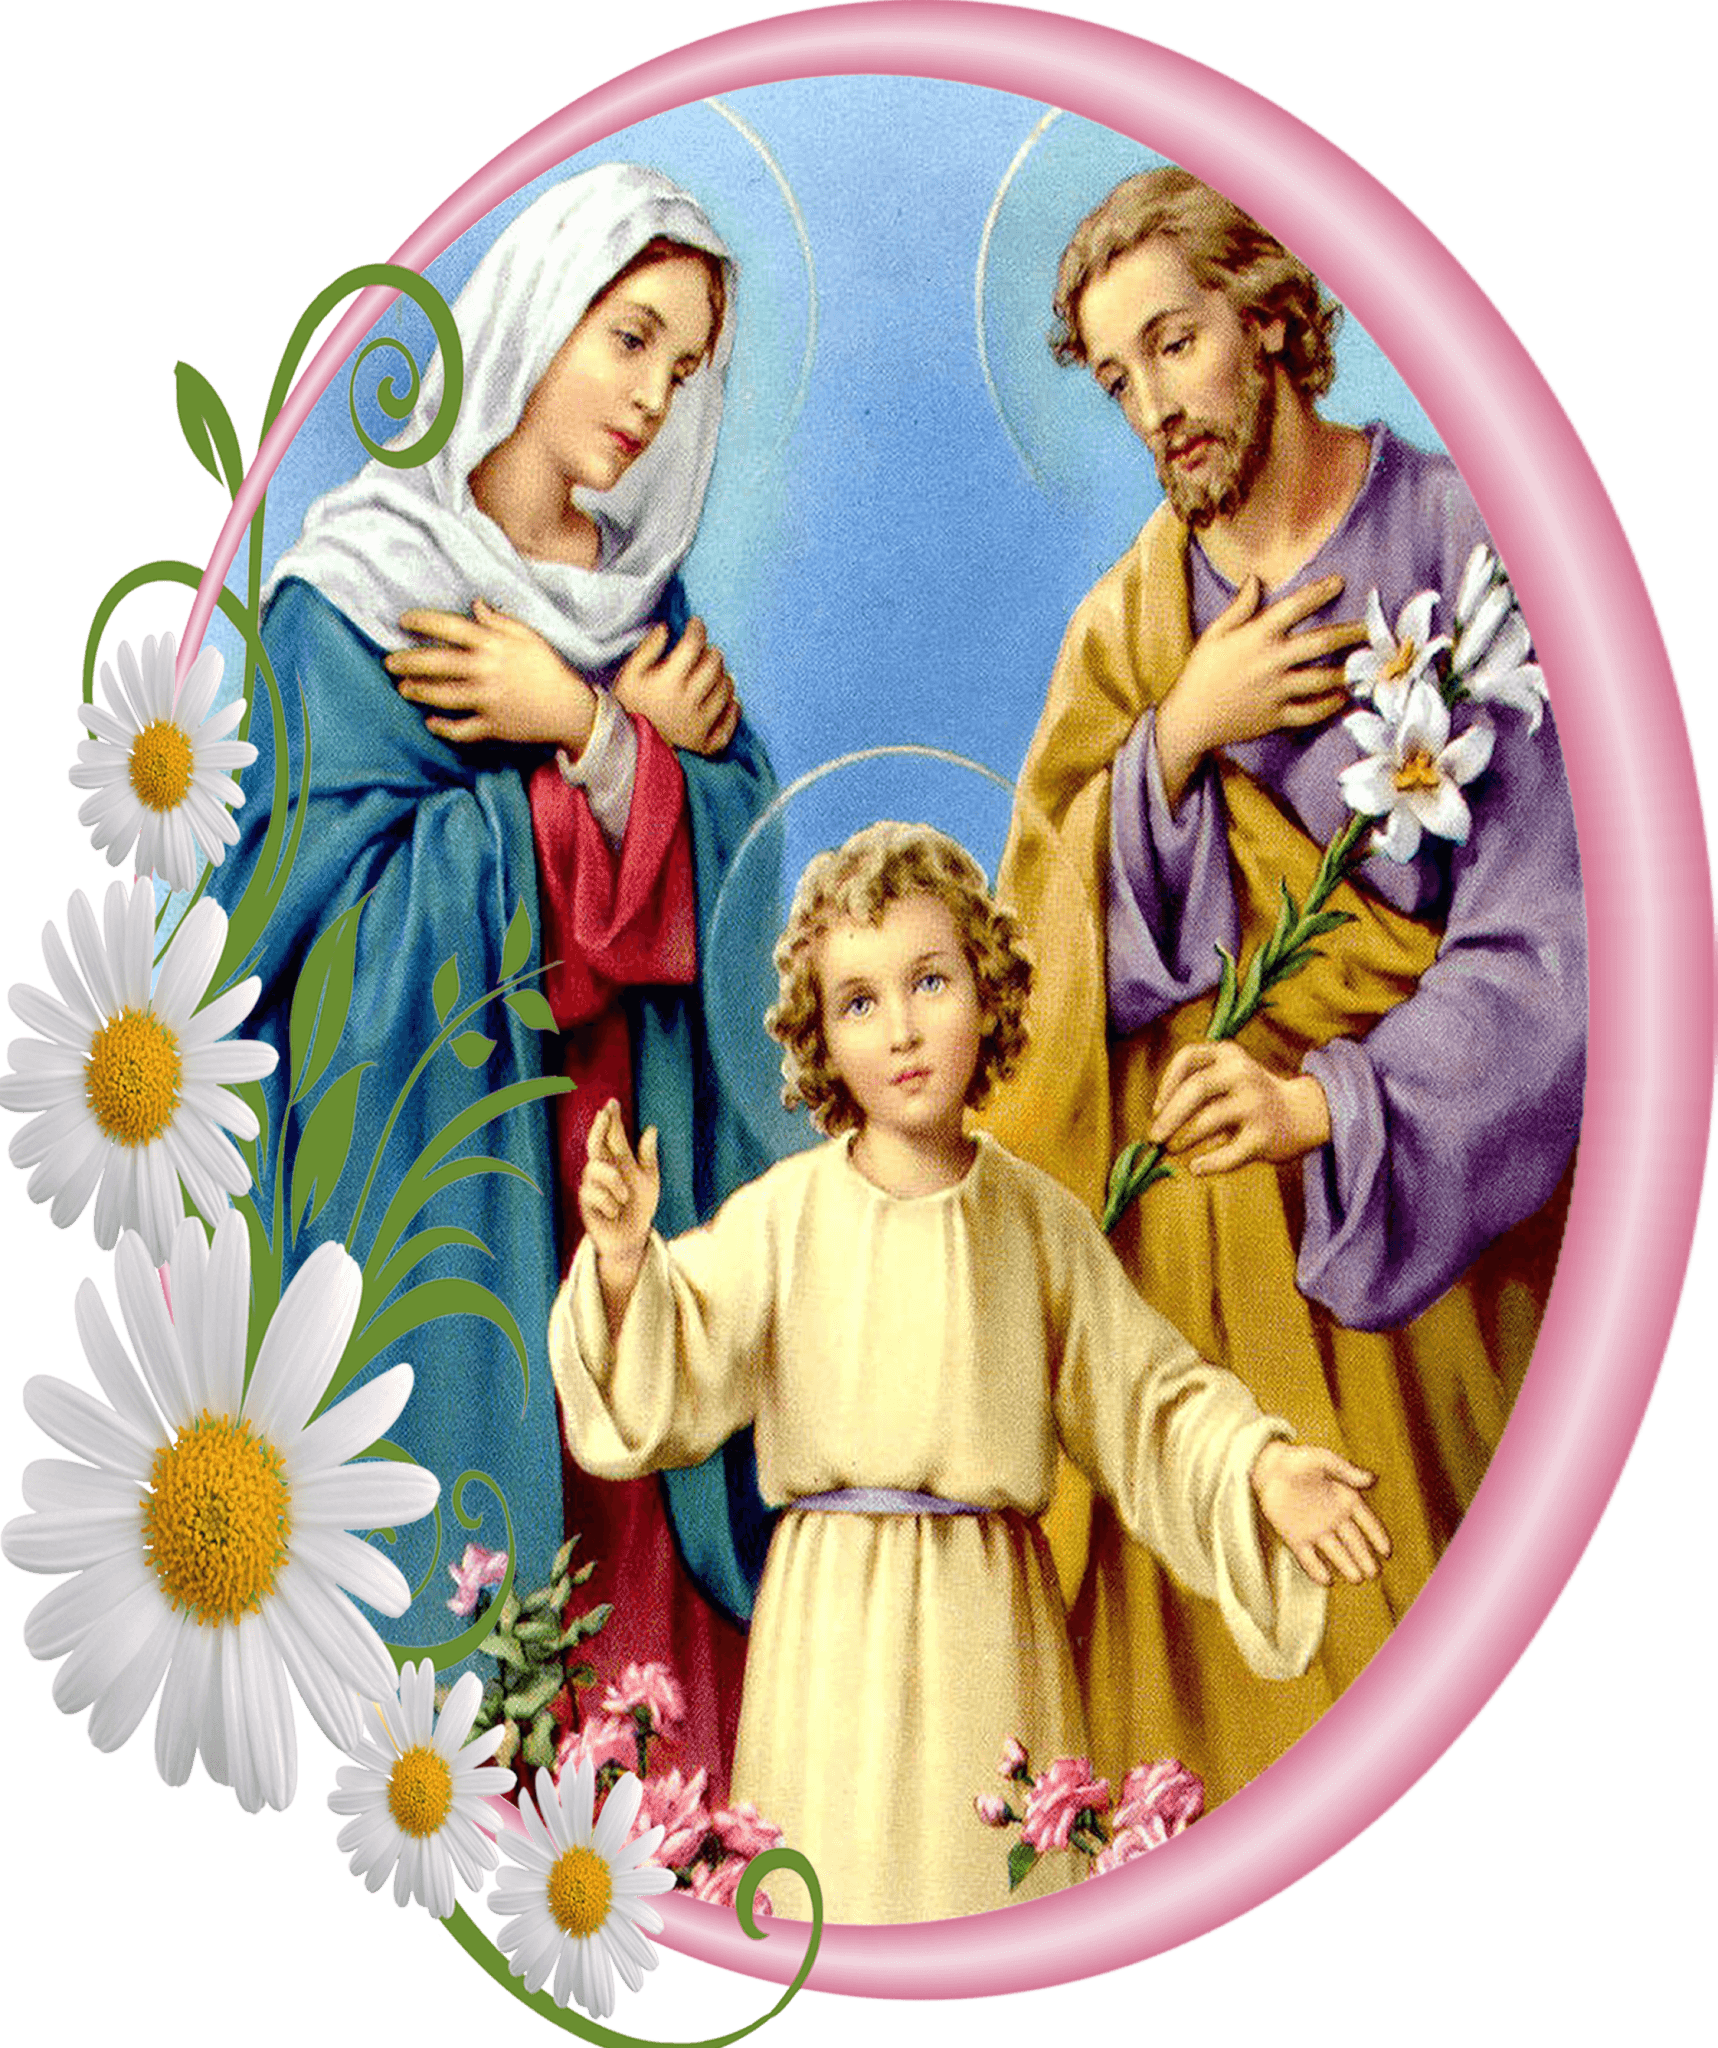 Religion Bible Family Holy Prayer Free Download Image Clipart